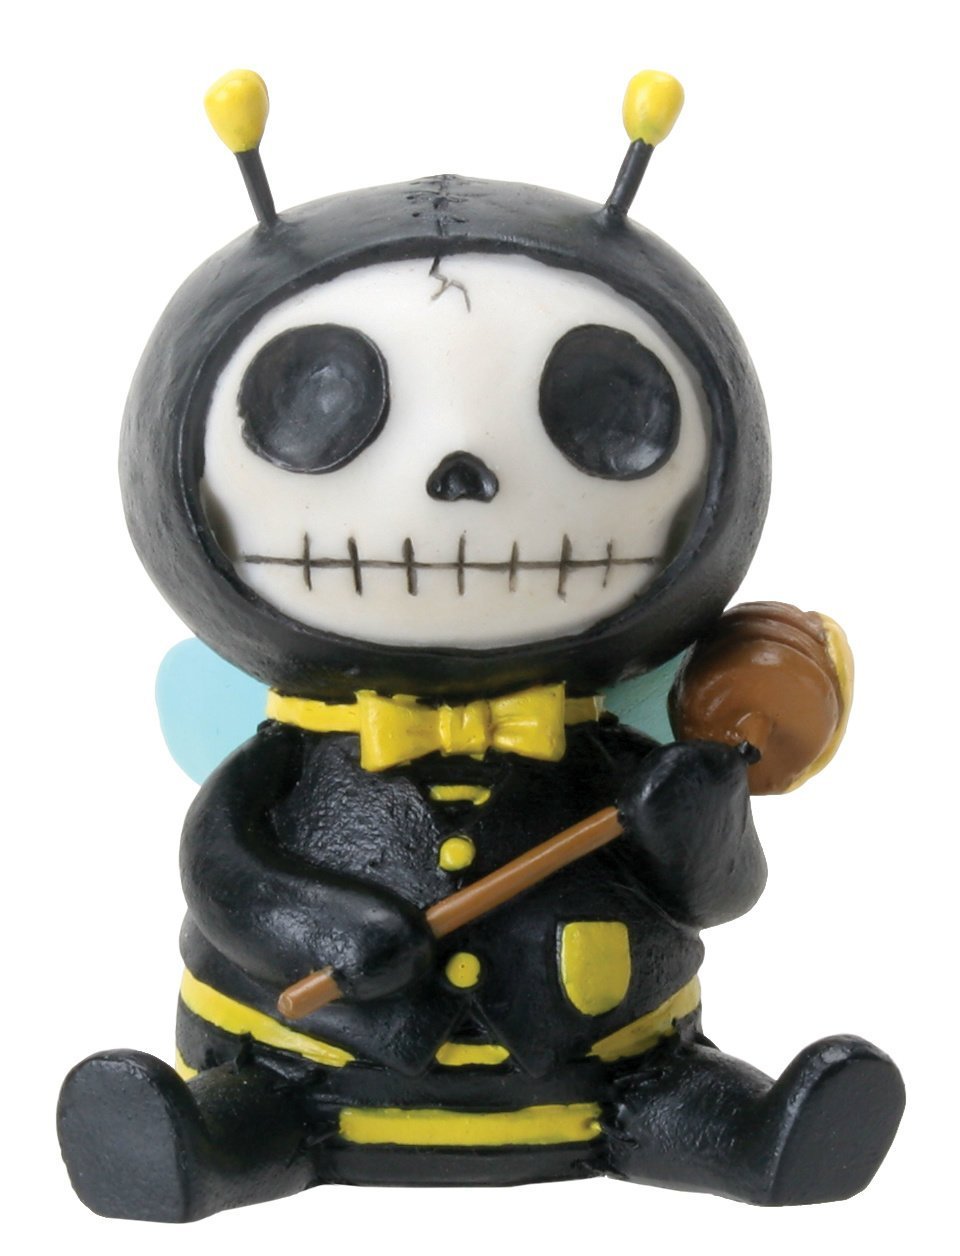 SUMMIT COLLECTION Furrybones Buzz Signature Skeleton in Bumble Bee Costume Holding a Honey Spoon